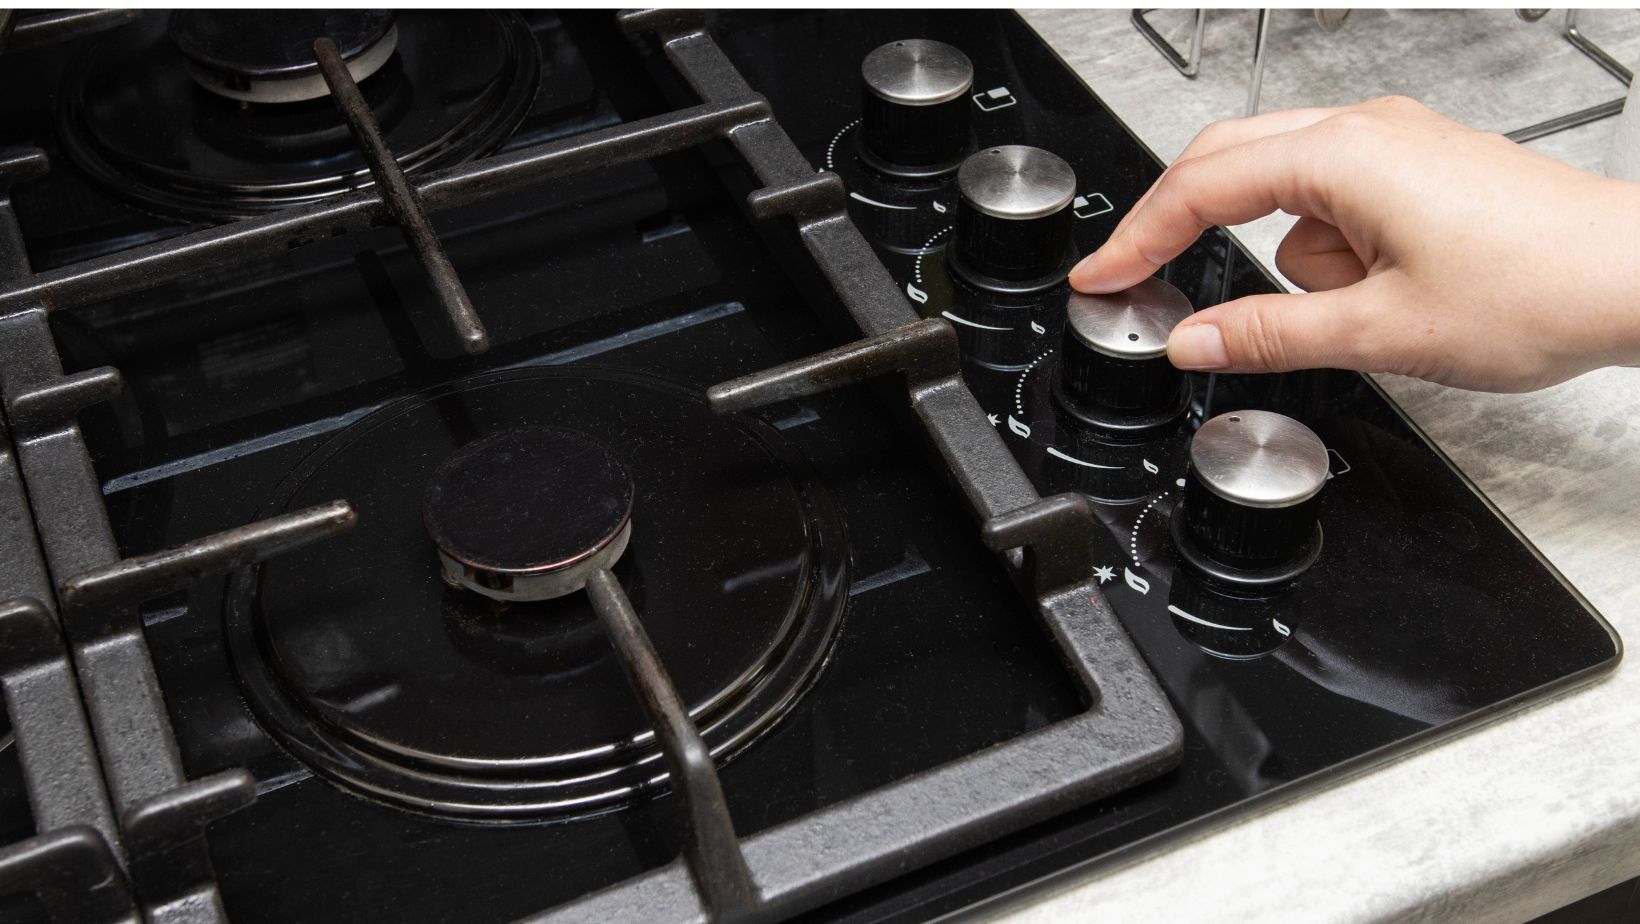 What Happens If You Turn Off Self-Cleaning Oven Early